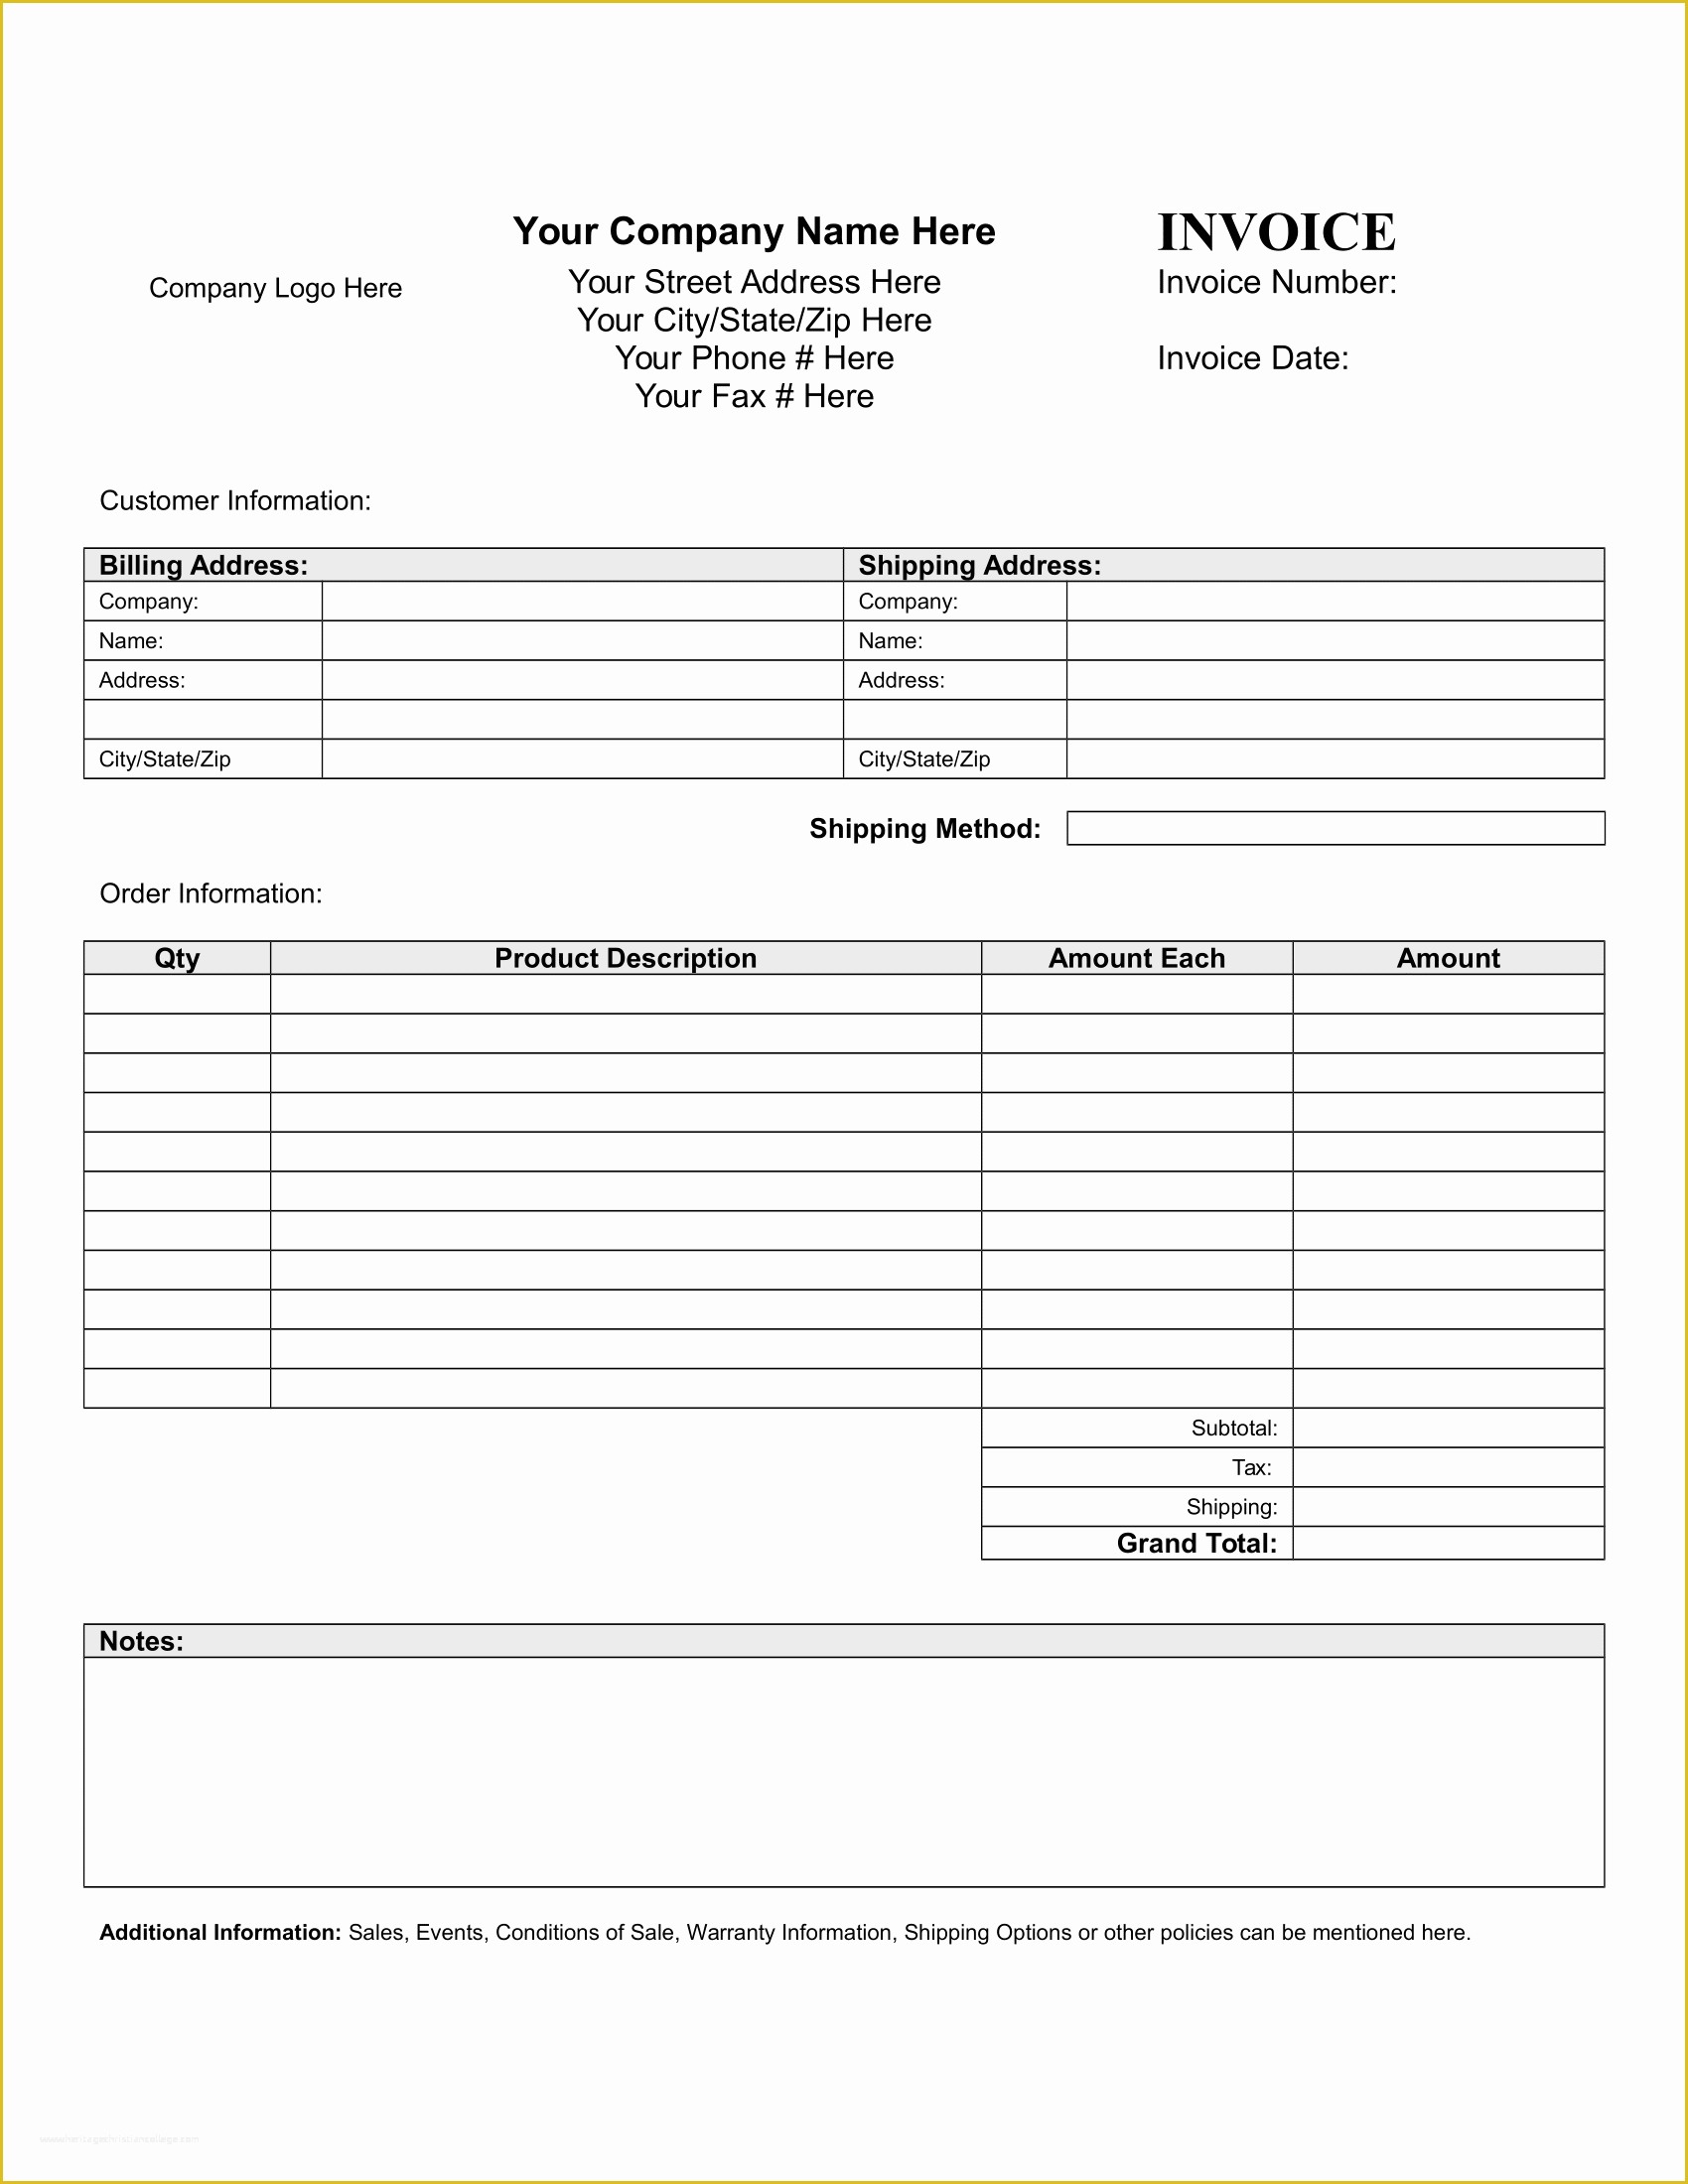 Free Standard Invoice Template Of forms Download Free Business Letter Templates forms